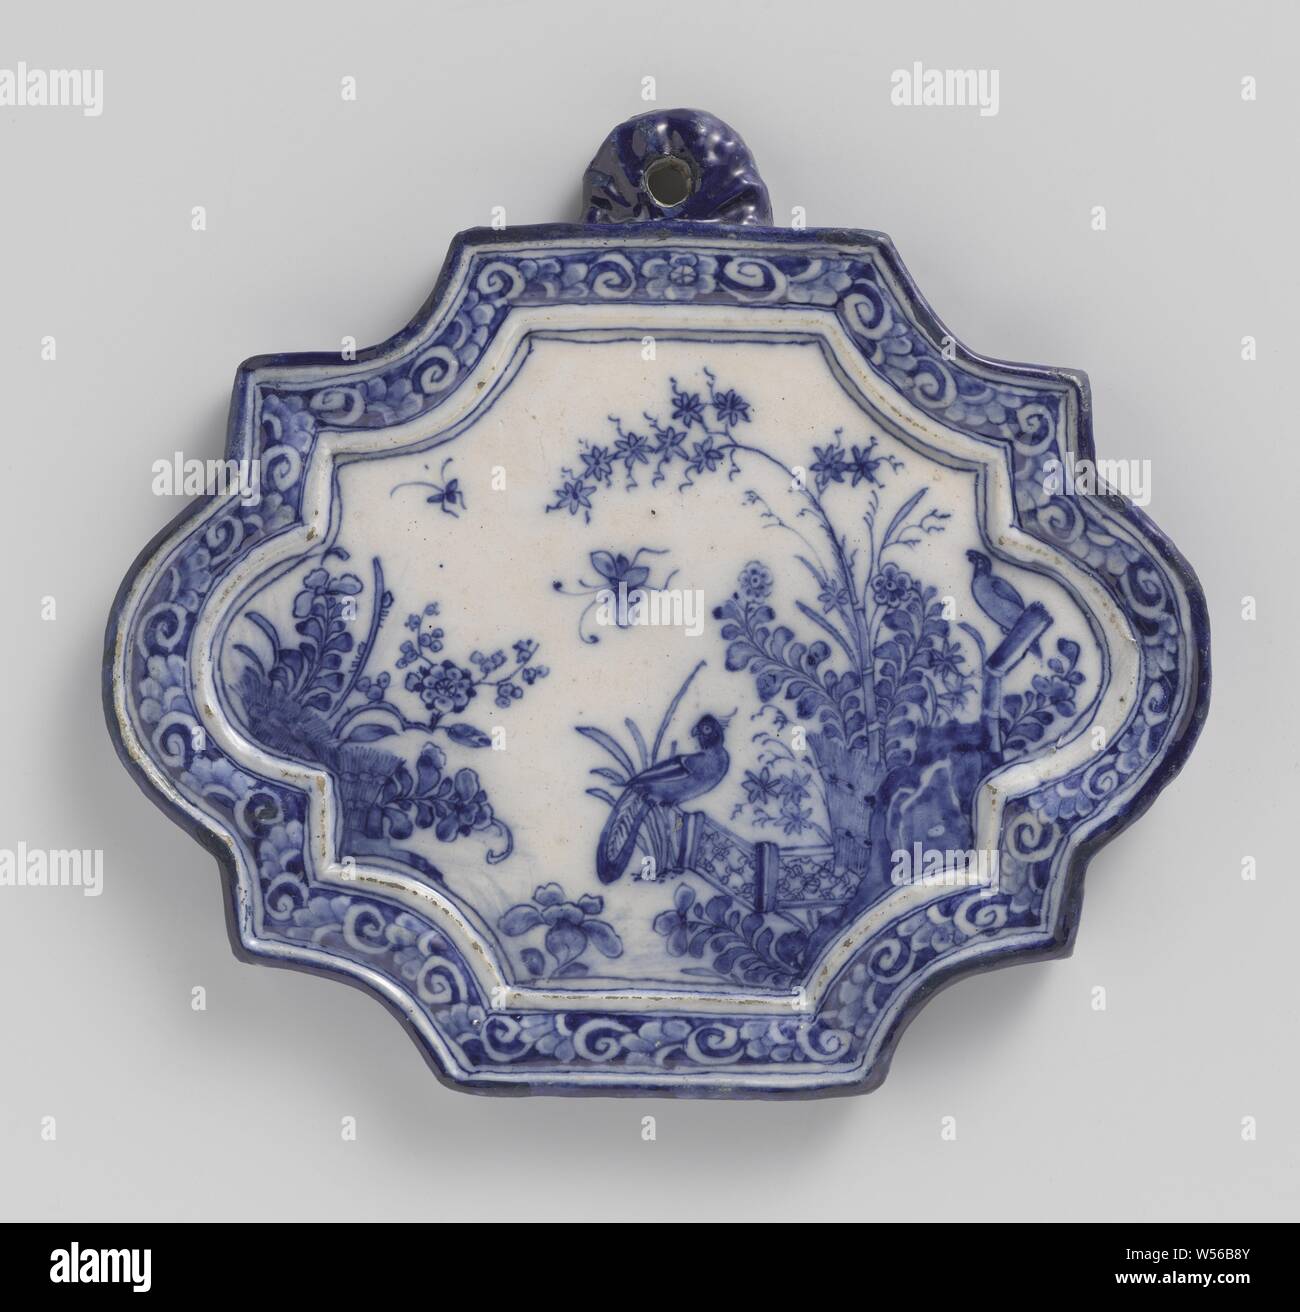 Plaque, Plate, Plate with chinoiserie decoration, faience plate with a chinoiserie decoration, birds, anonymous, Delft, c. 1725 - c. 1750, h 18.5 cm × w 24 cm Stock Photo